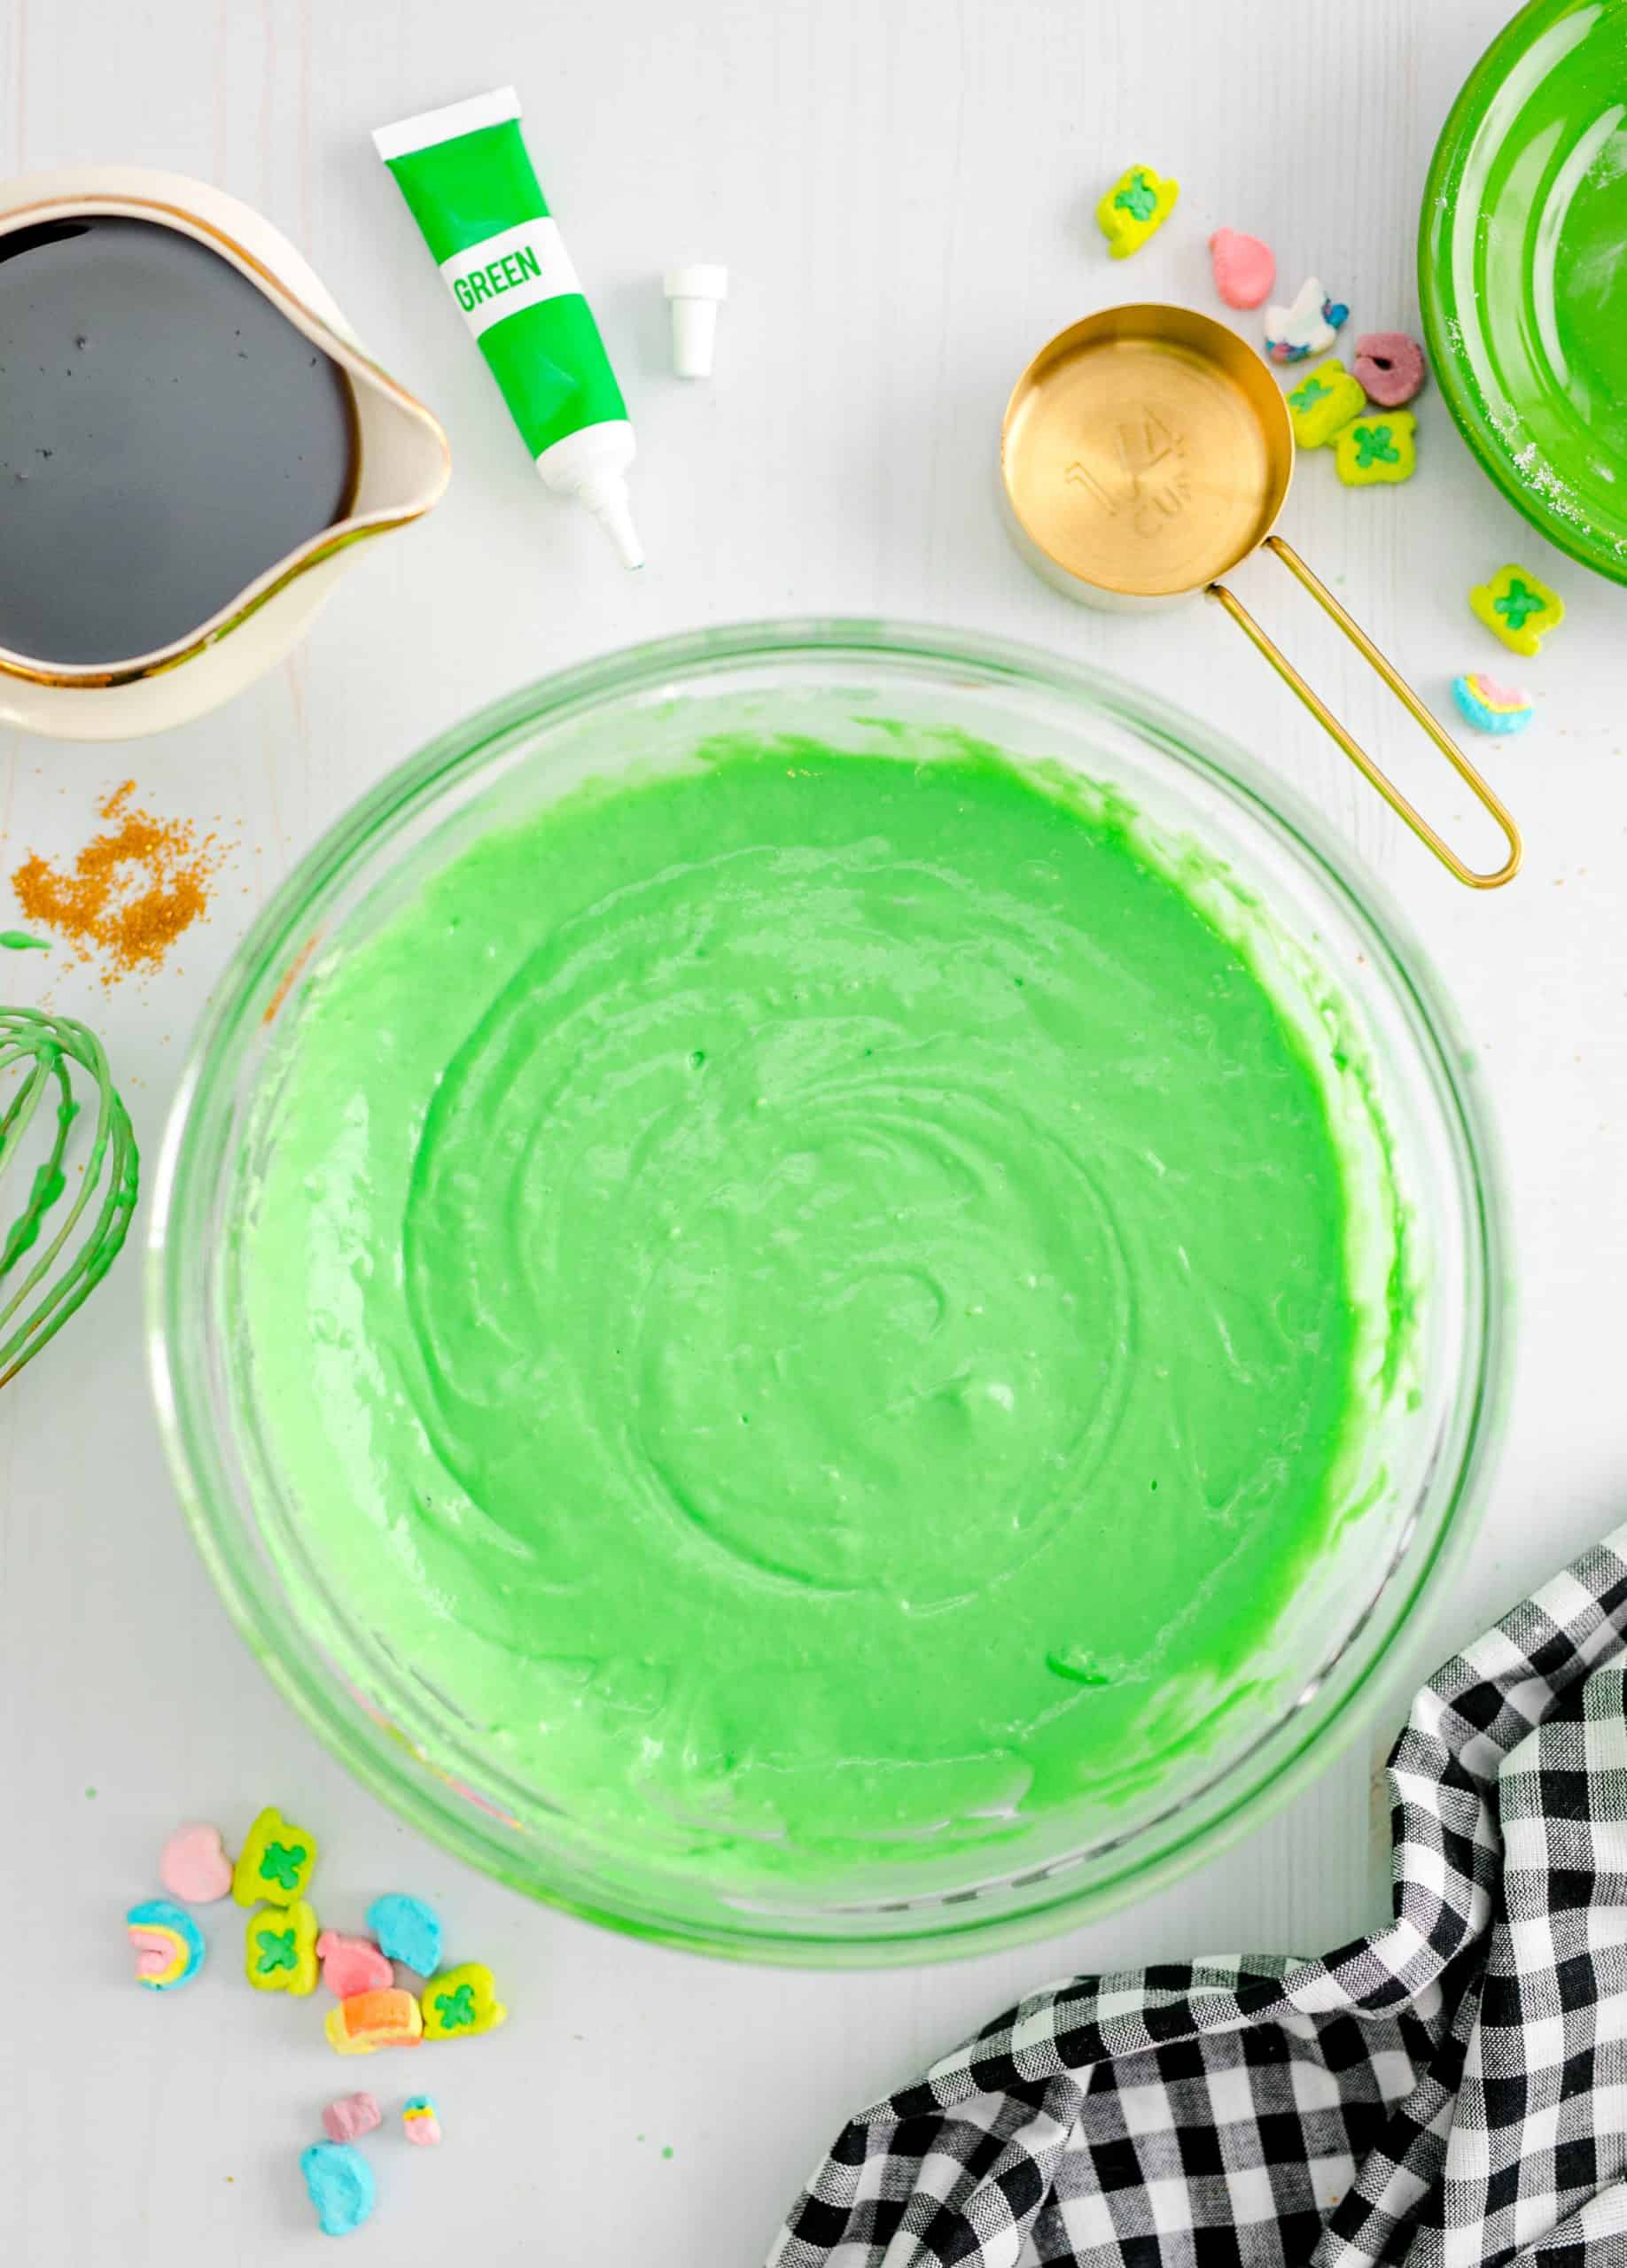 St. Patrick's Green Pancakes batter whisked up in a bowl.